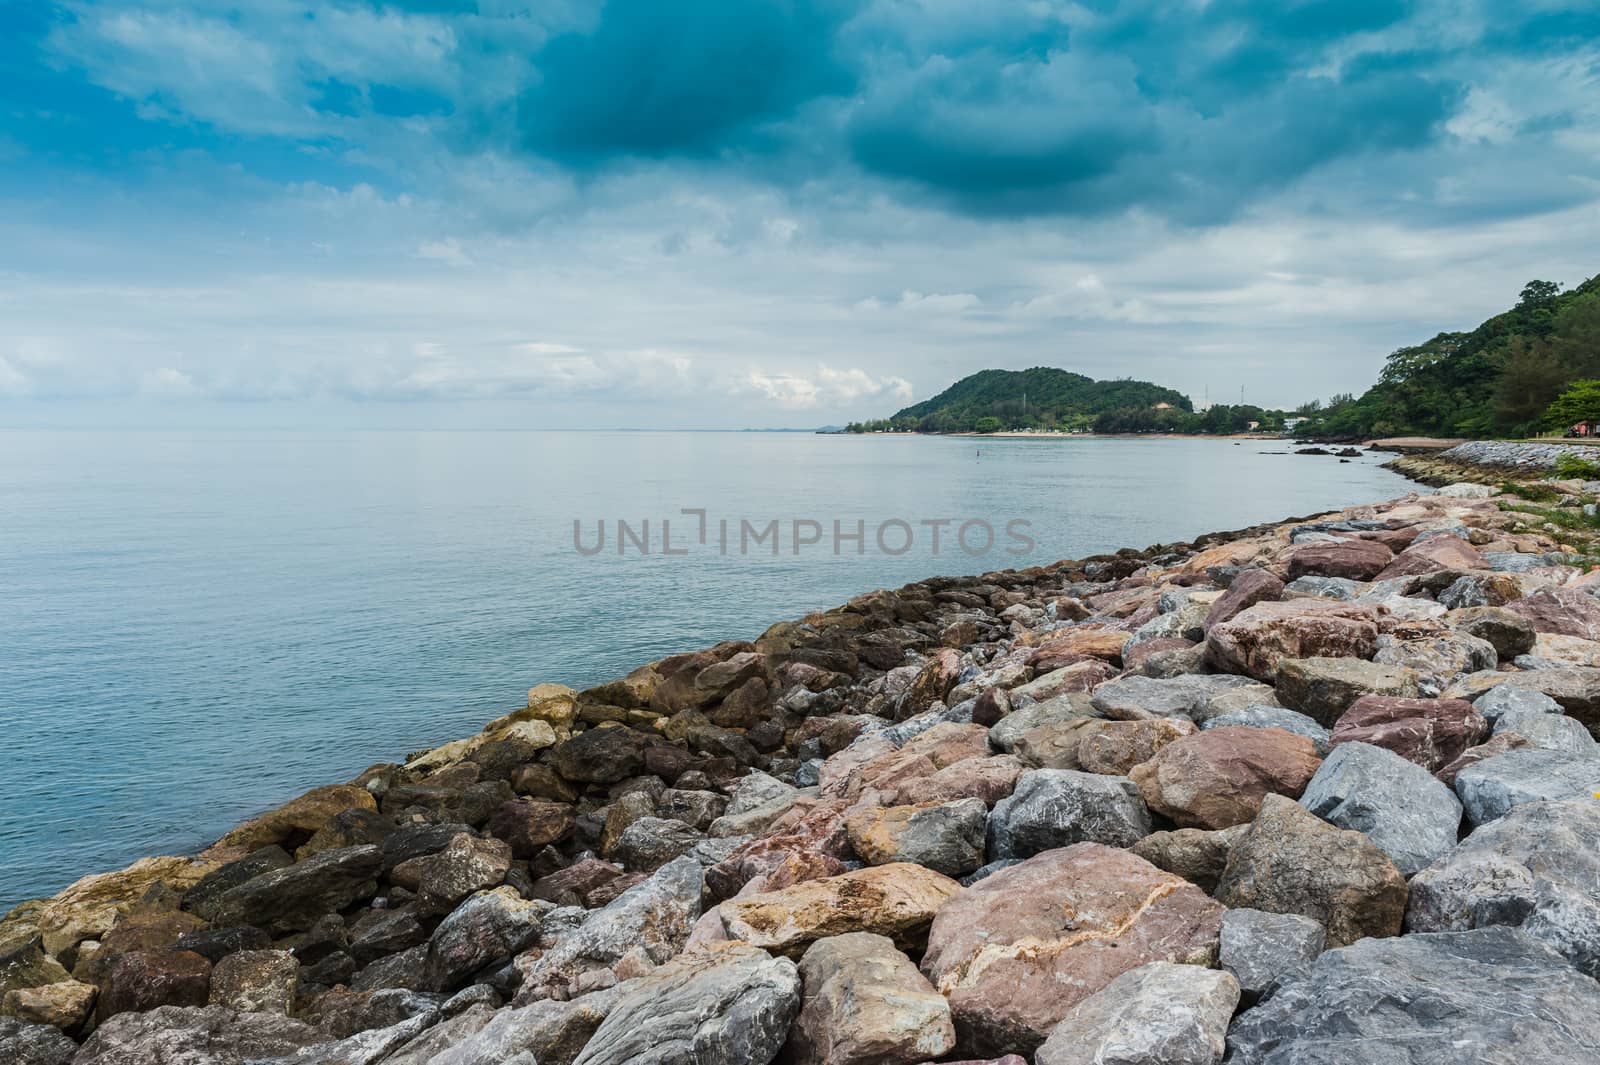 Landscape of rock beach and sea, Nang Phaya hill scenic point by sayhmog